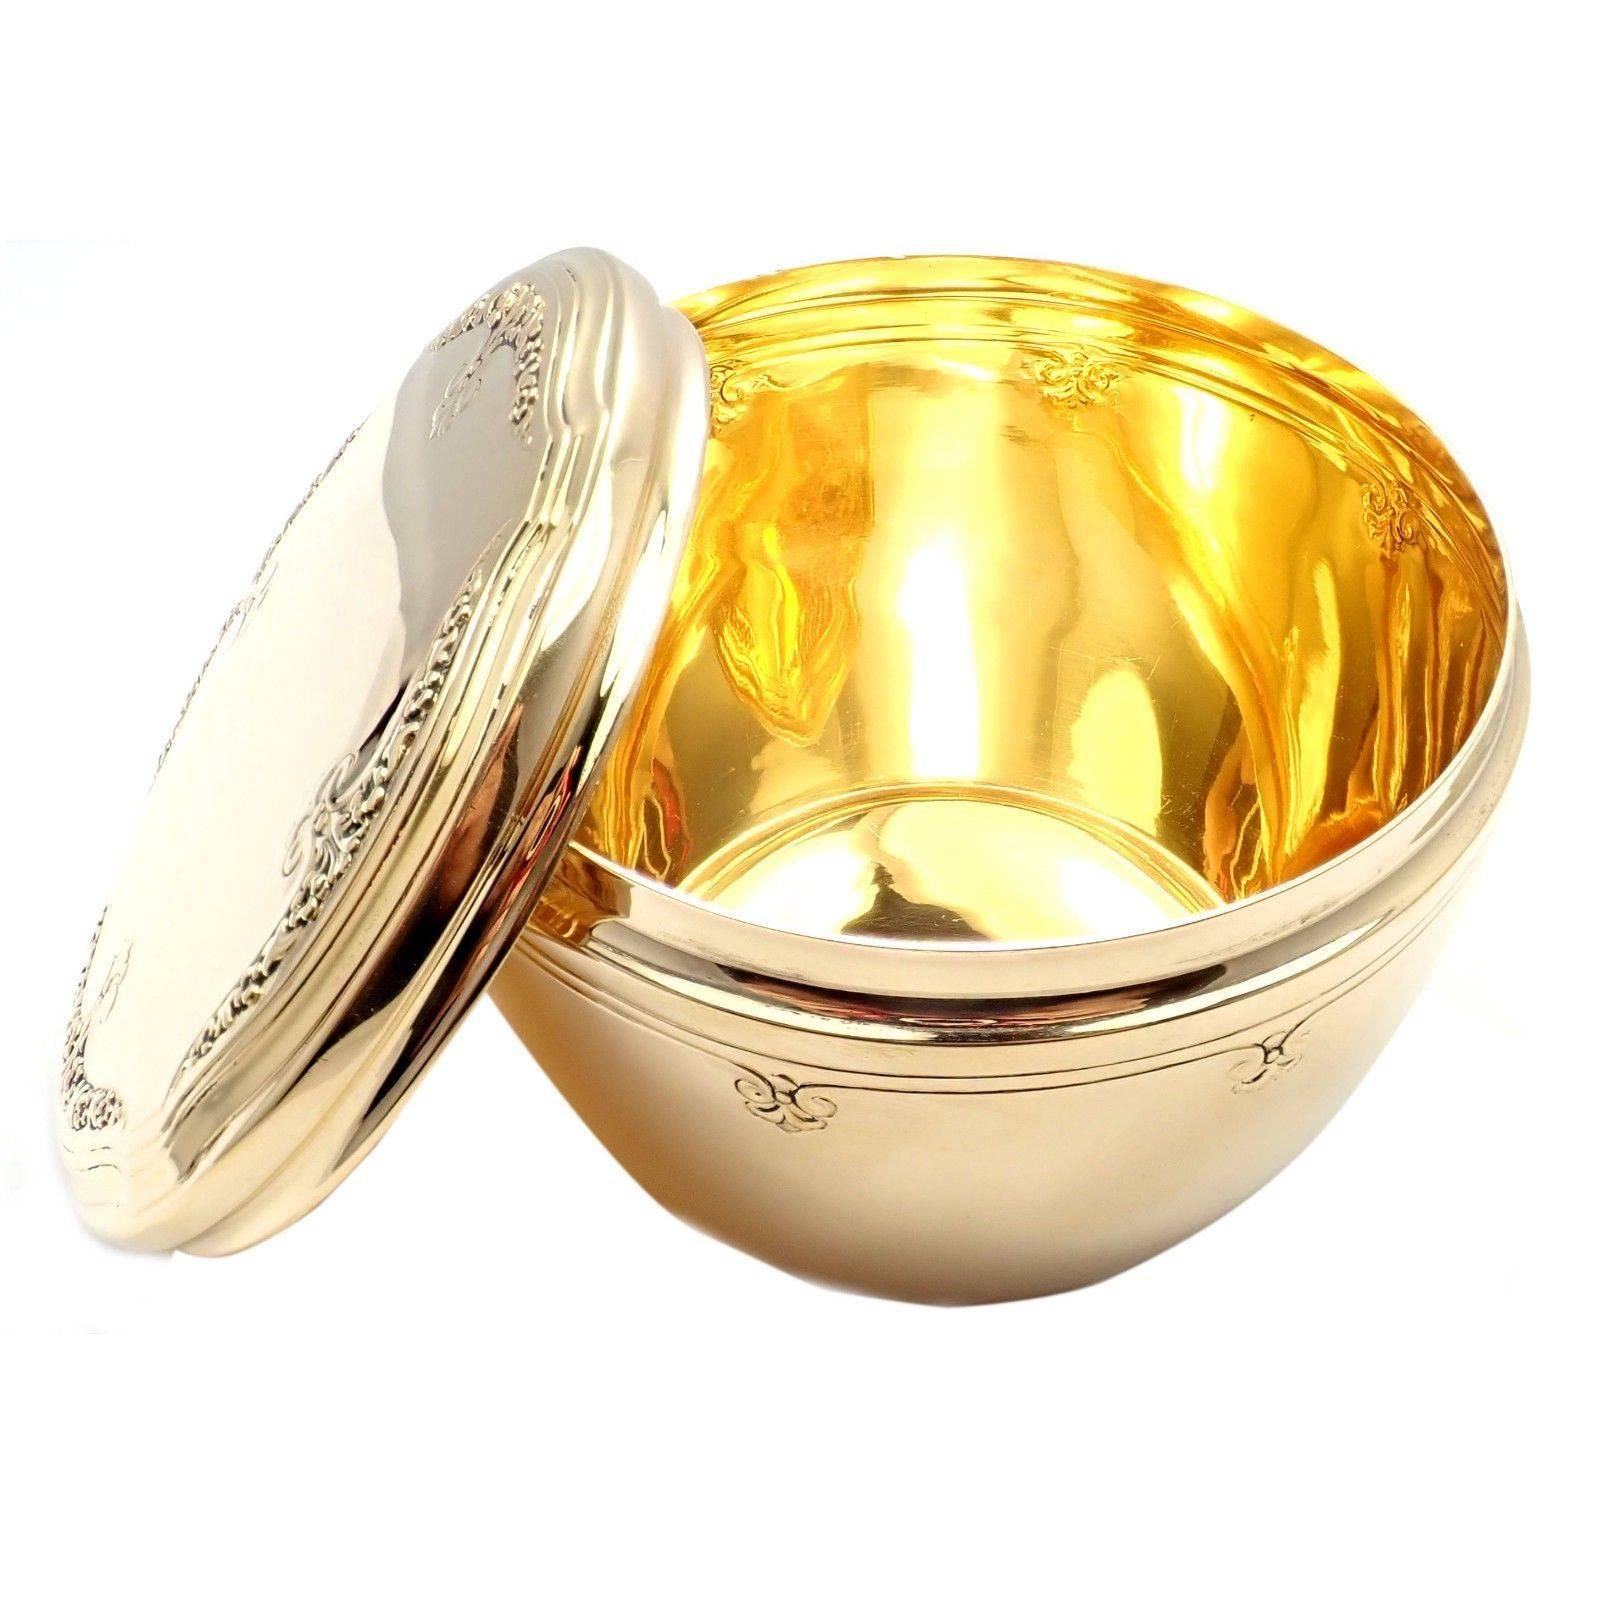 18k Solid Yellow Gold Antique Box Jar by Tiffany & Co.
*** Information about this jar:  Directorship Under John C Moore II 1907-1947 Serial Number Dates this circa 1910
Details:
Measurements: 3.75